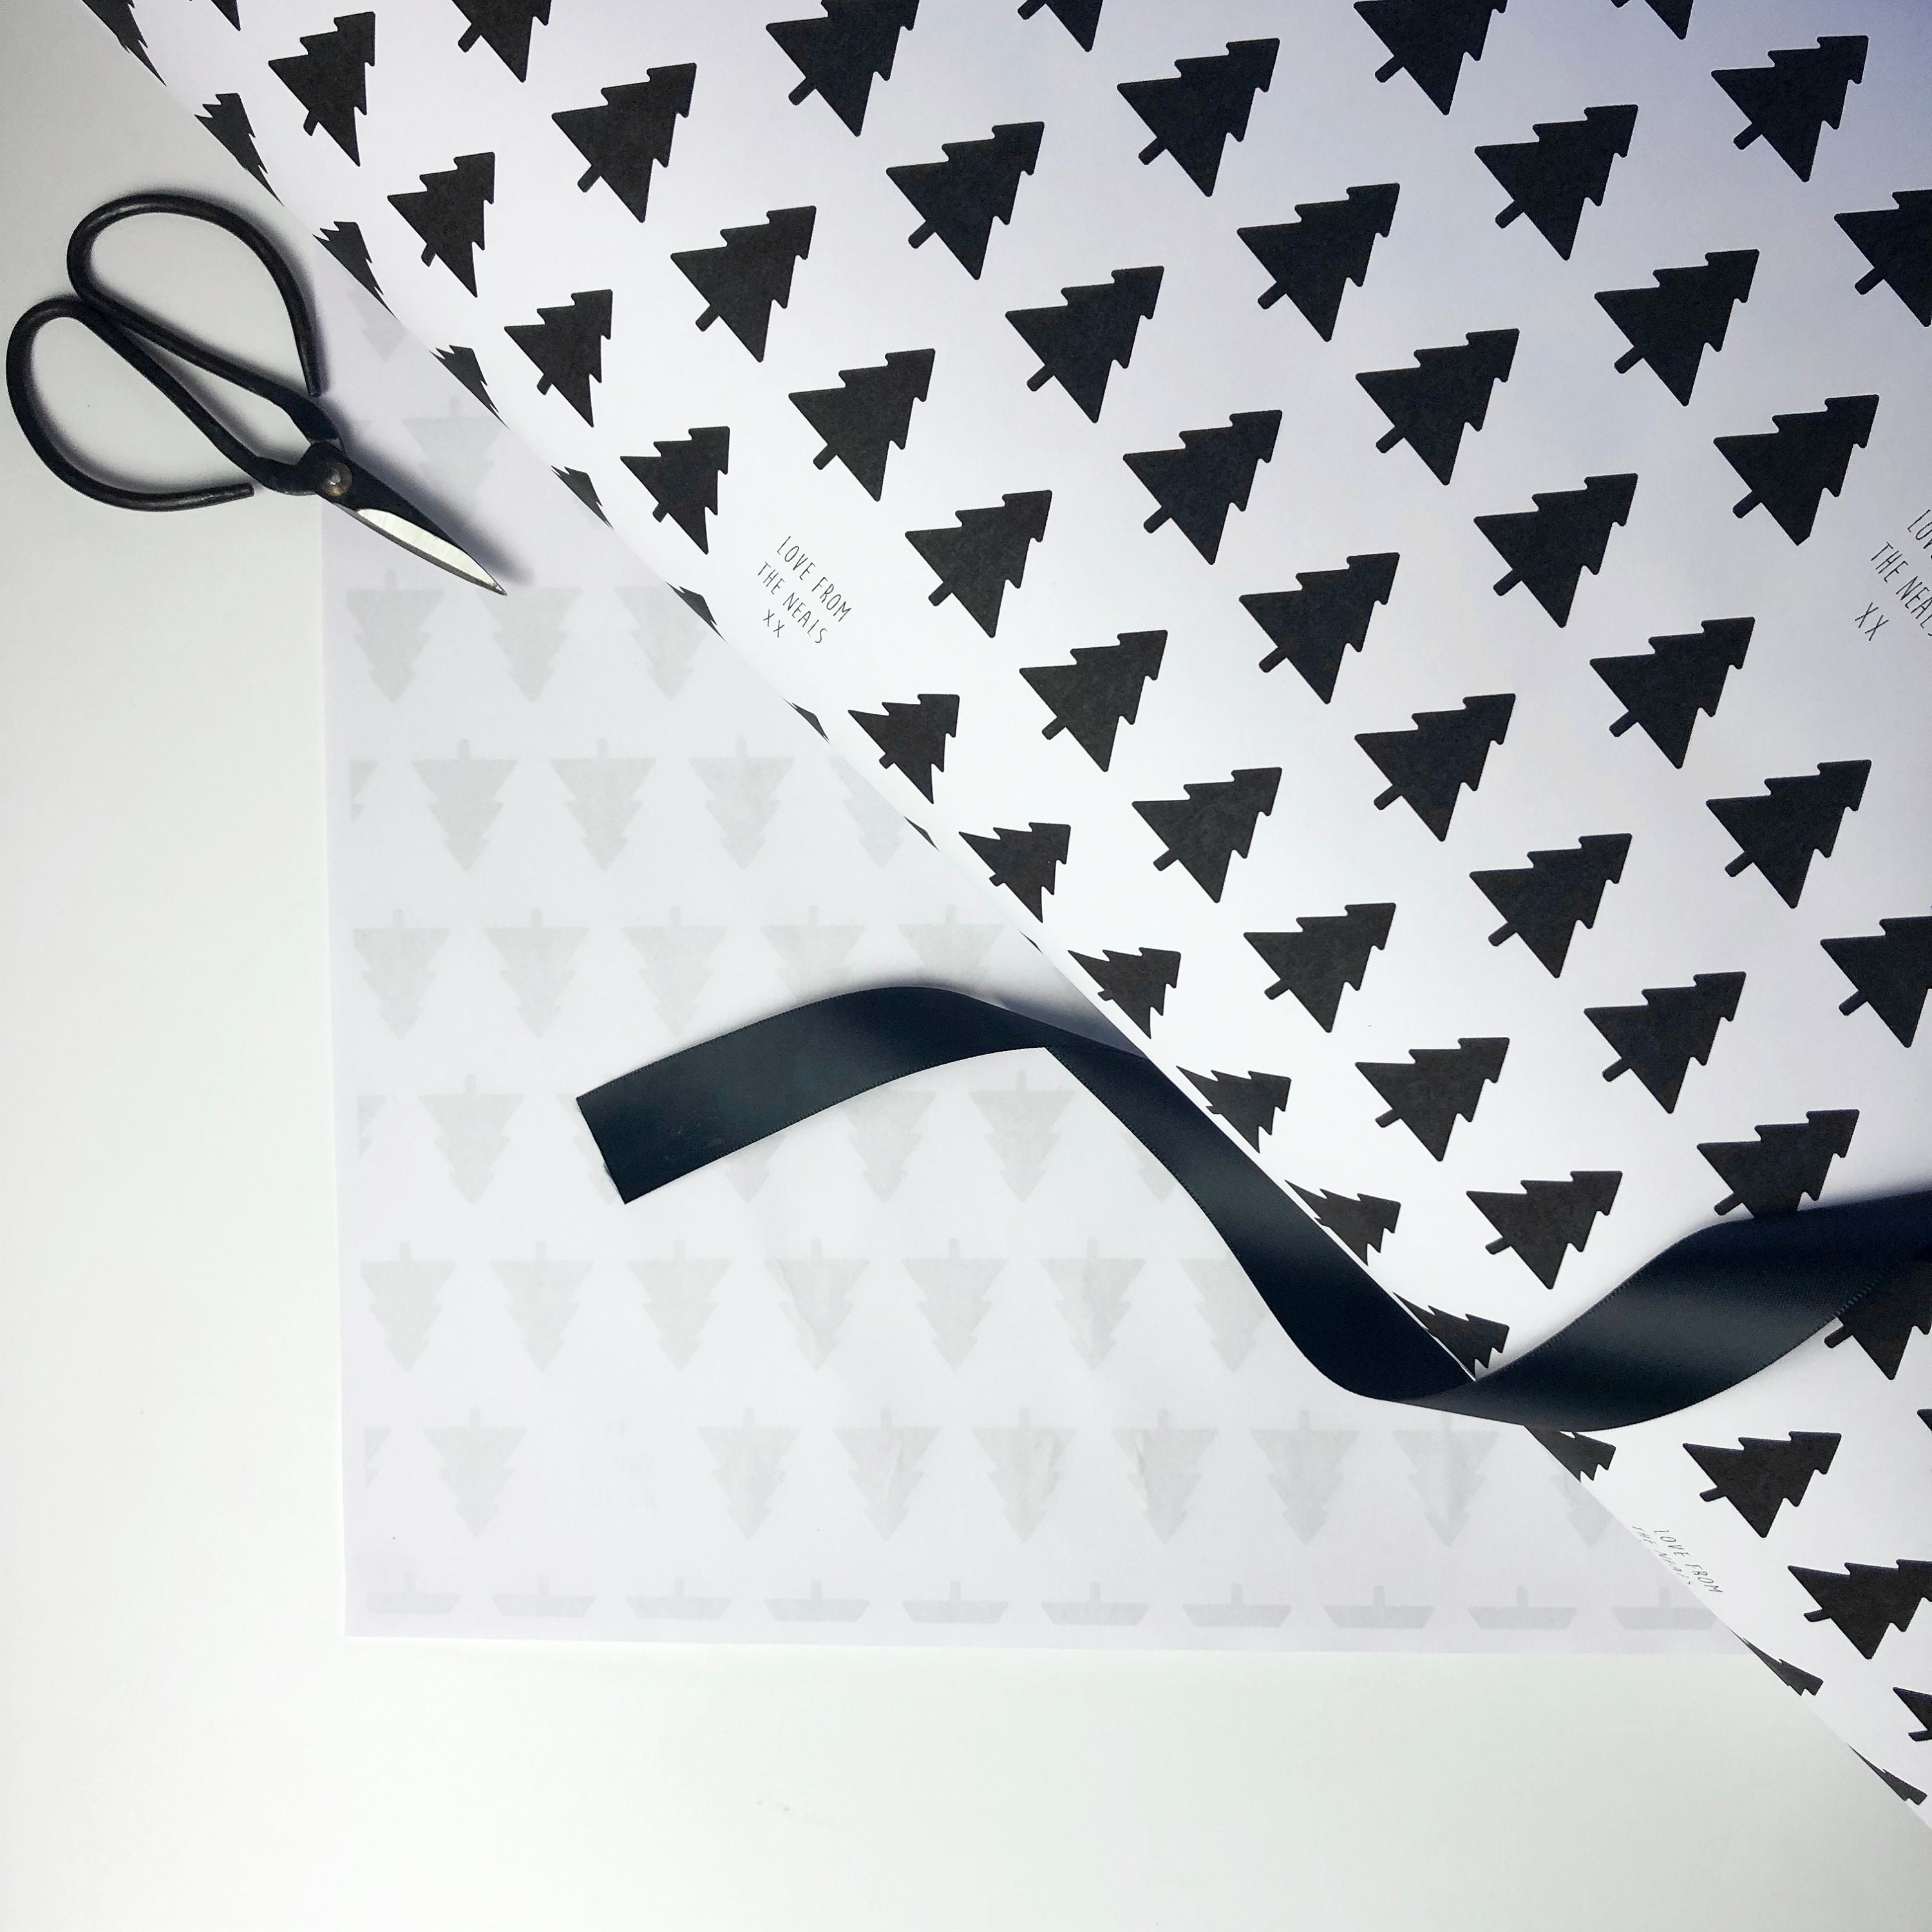 Personalised Gifting and Recyclable High Quality Wrapping Paper